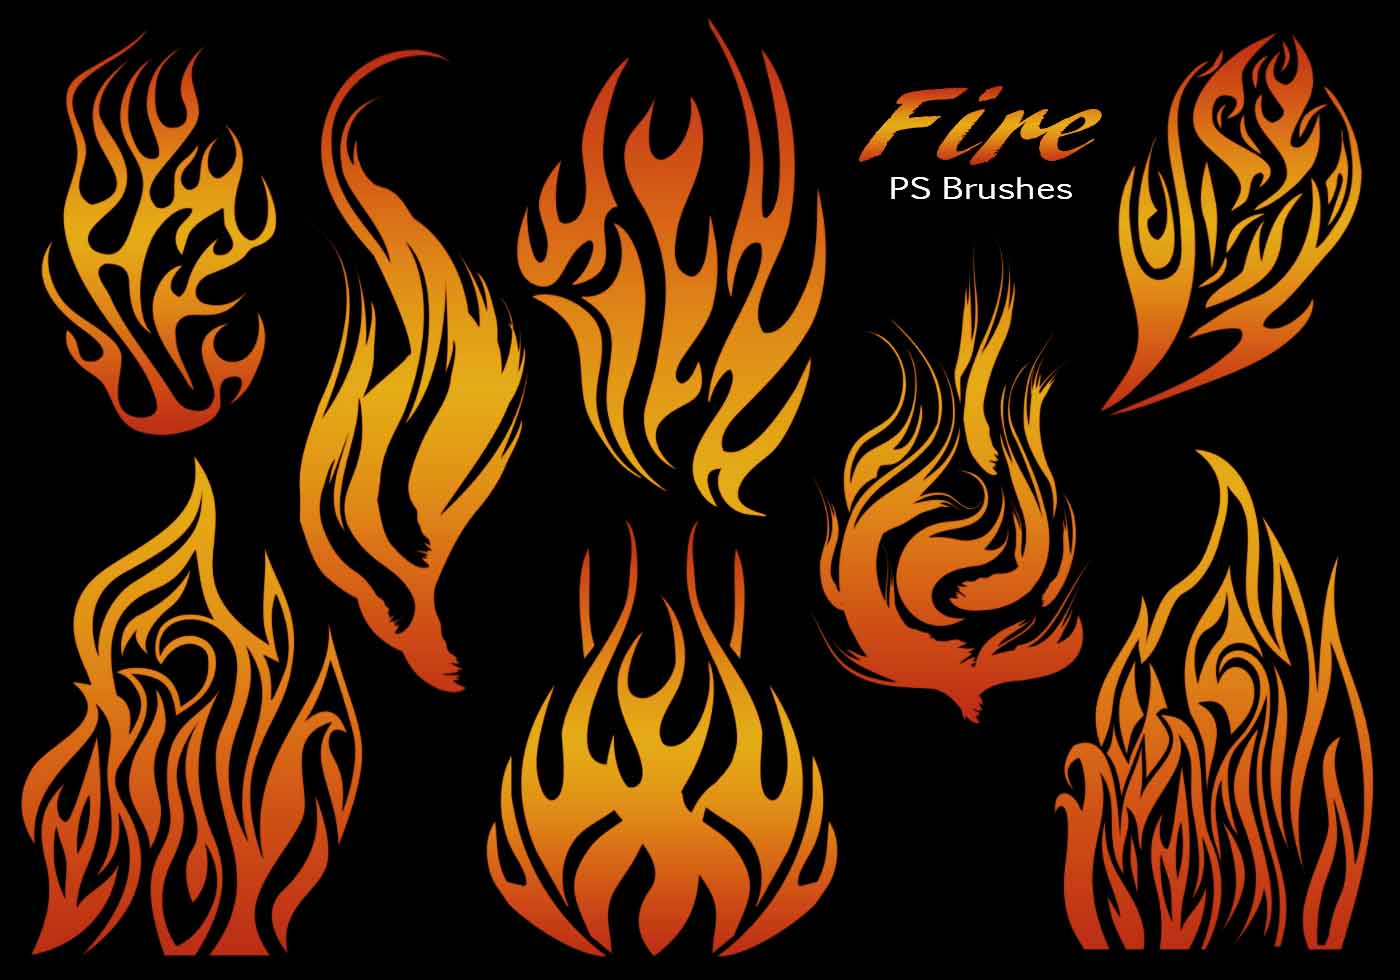 20 Fire Silhouette PS Brushes